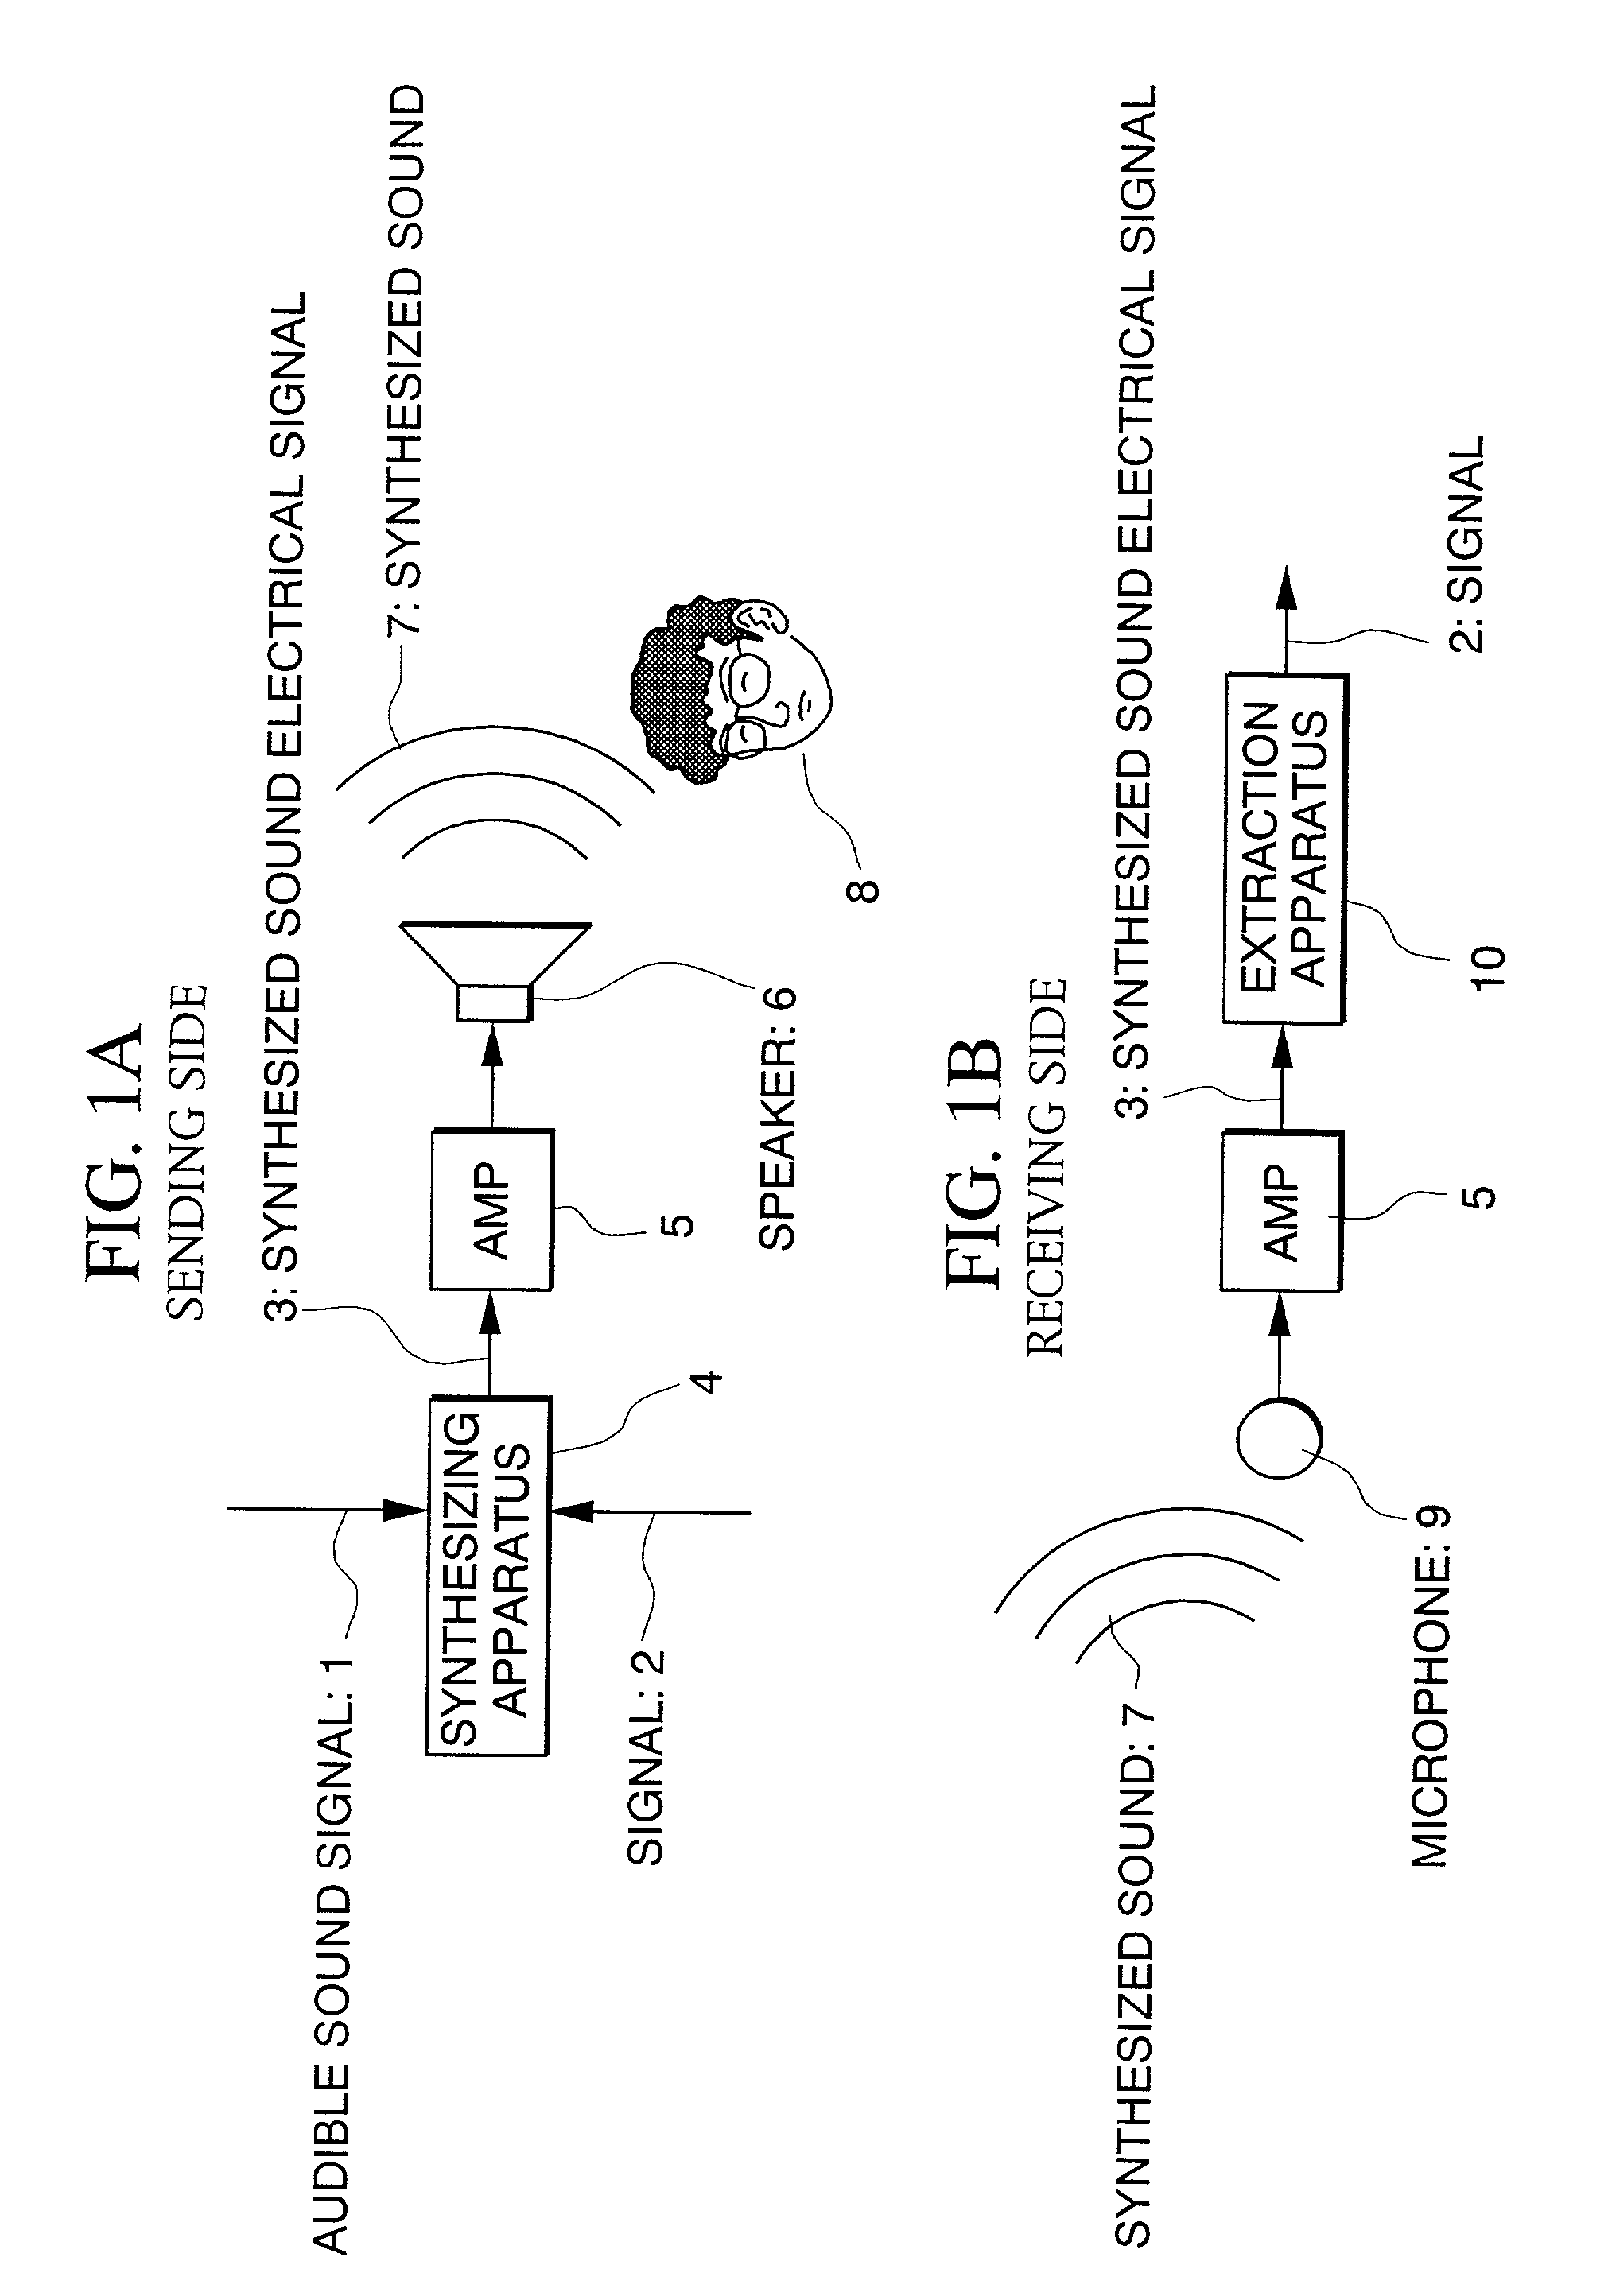 Acoustic signal transmission with insertion signal for machine control